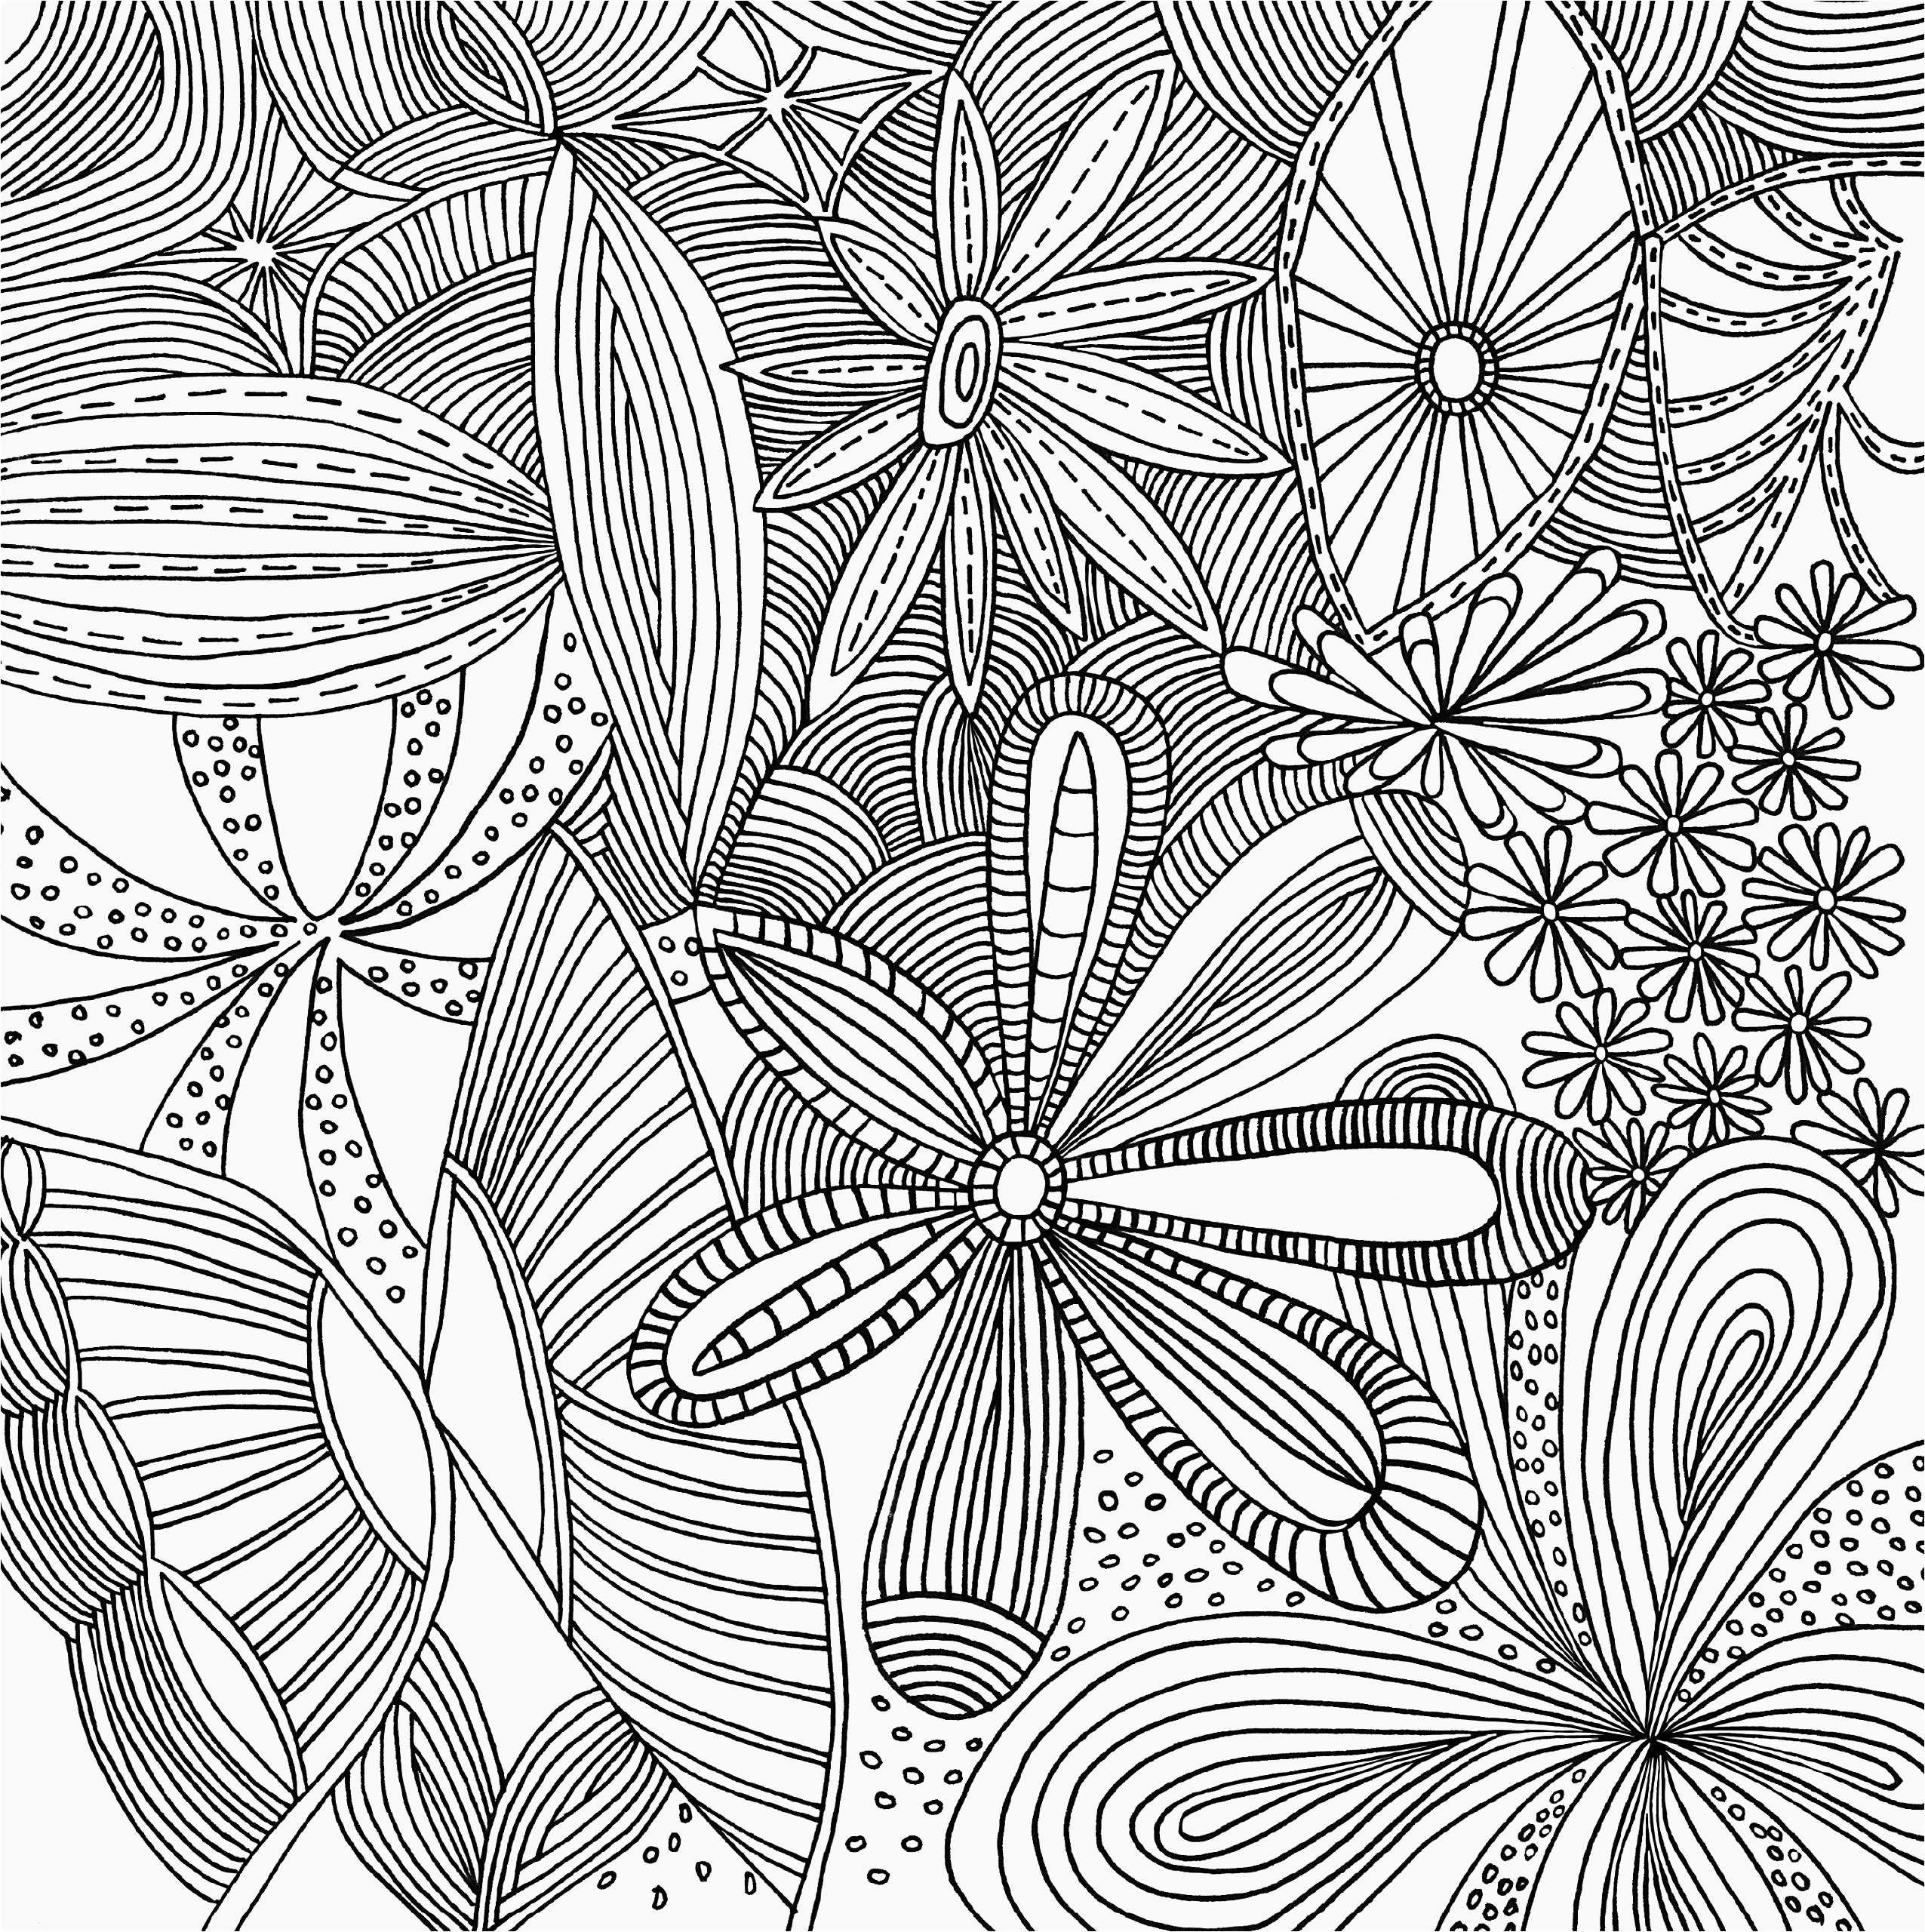 Beautiful Nature Coloring Pages 53 Awesome Colorfy Coloring Book Brainstormchi